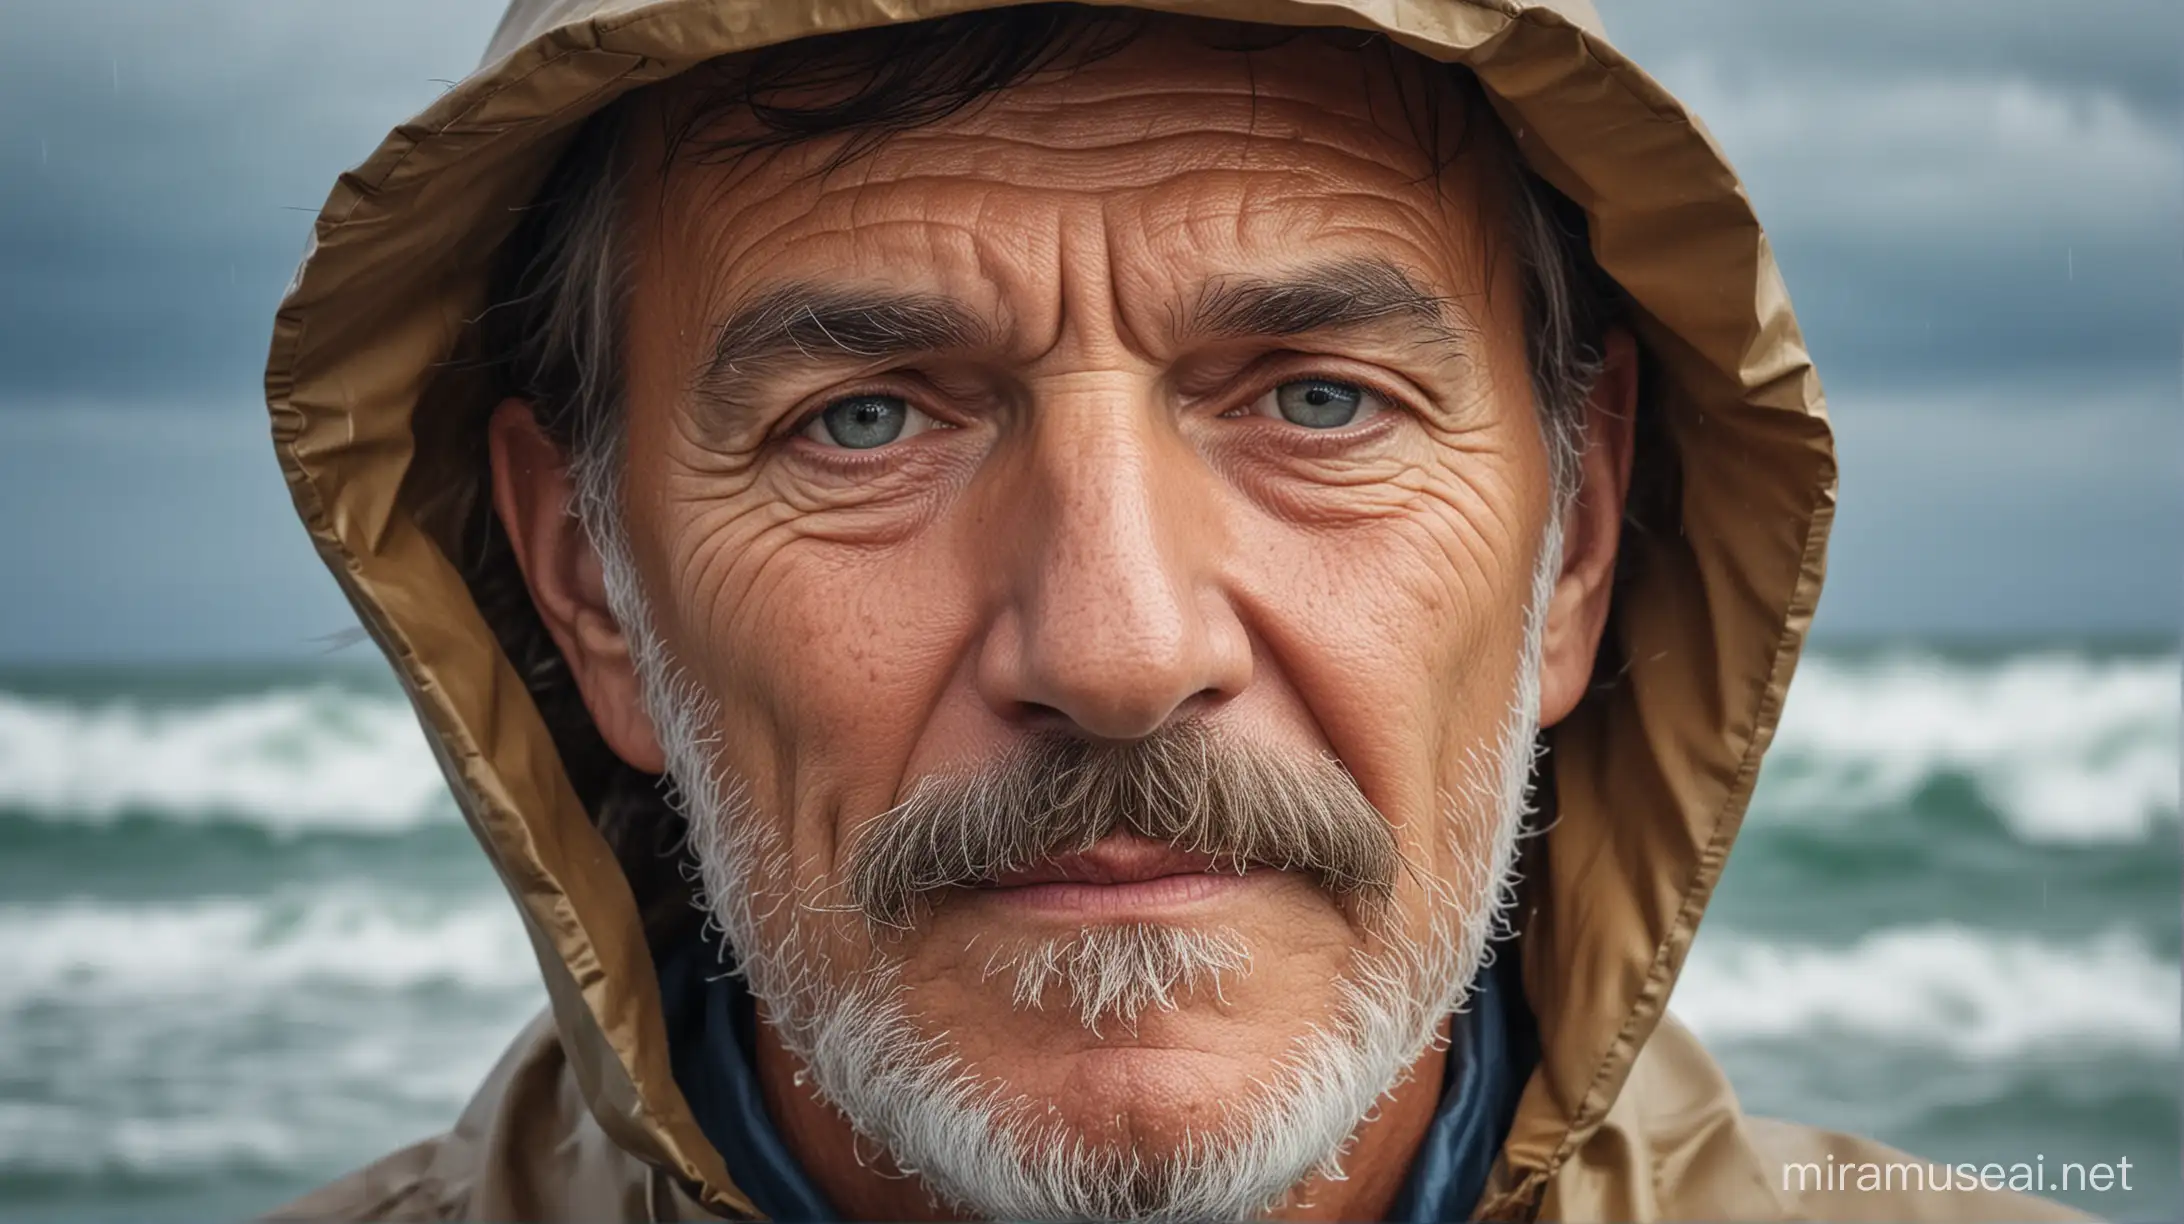 Closeup of Old Fishermans face in raincoat and with mustache. Sea, waves and clouds in background
